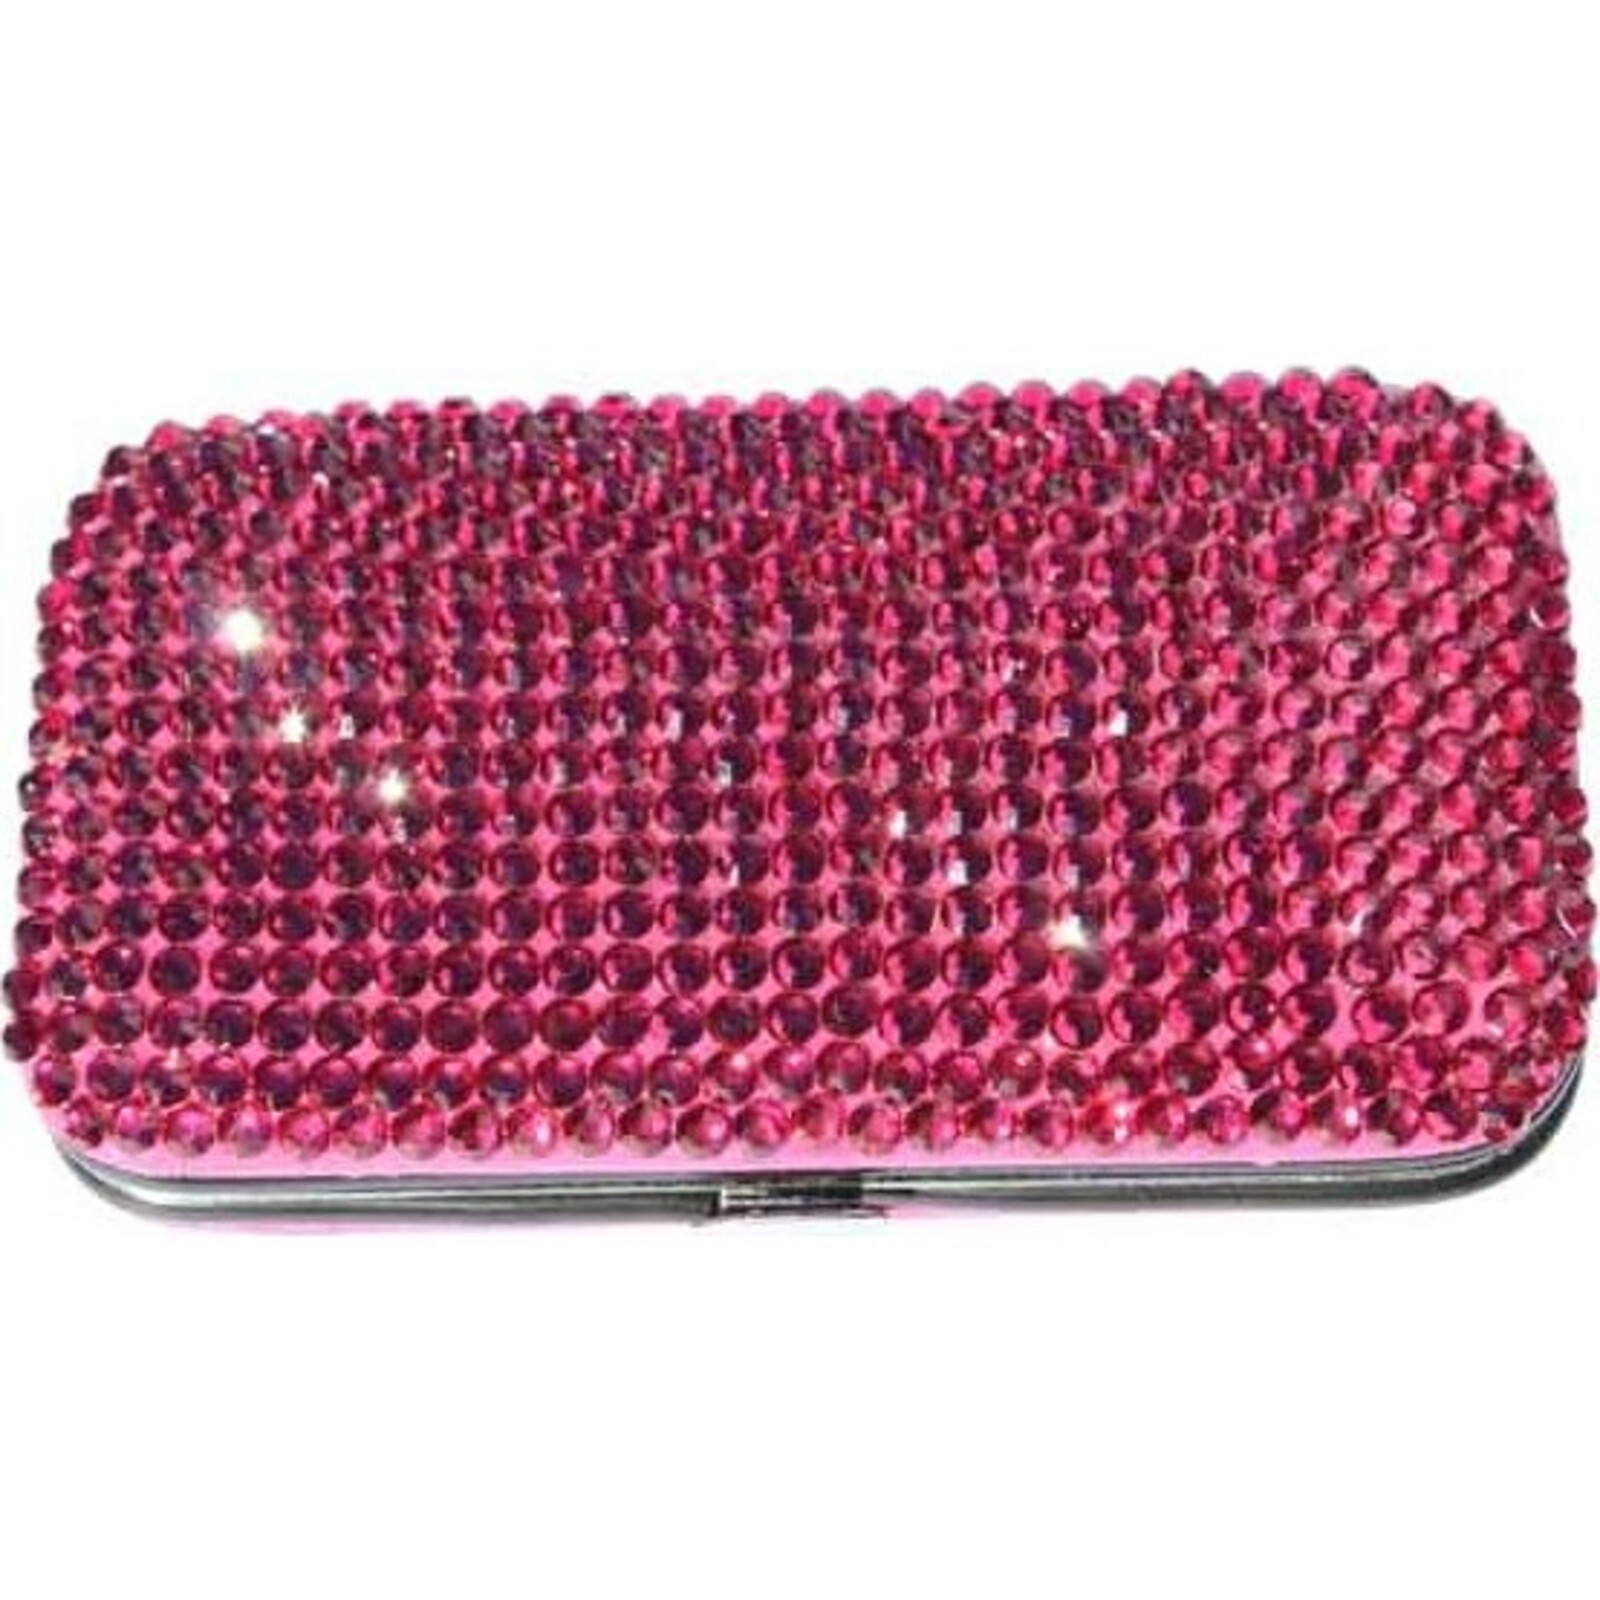 Manicure Case - Bling Pink